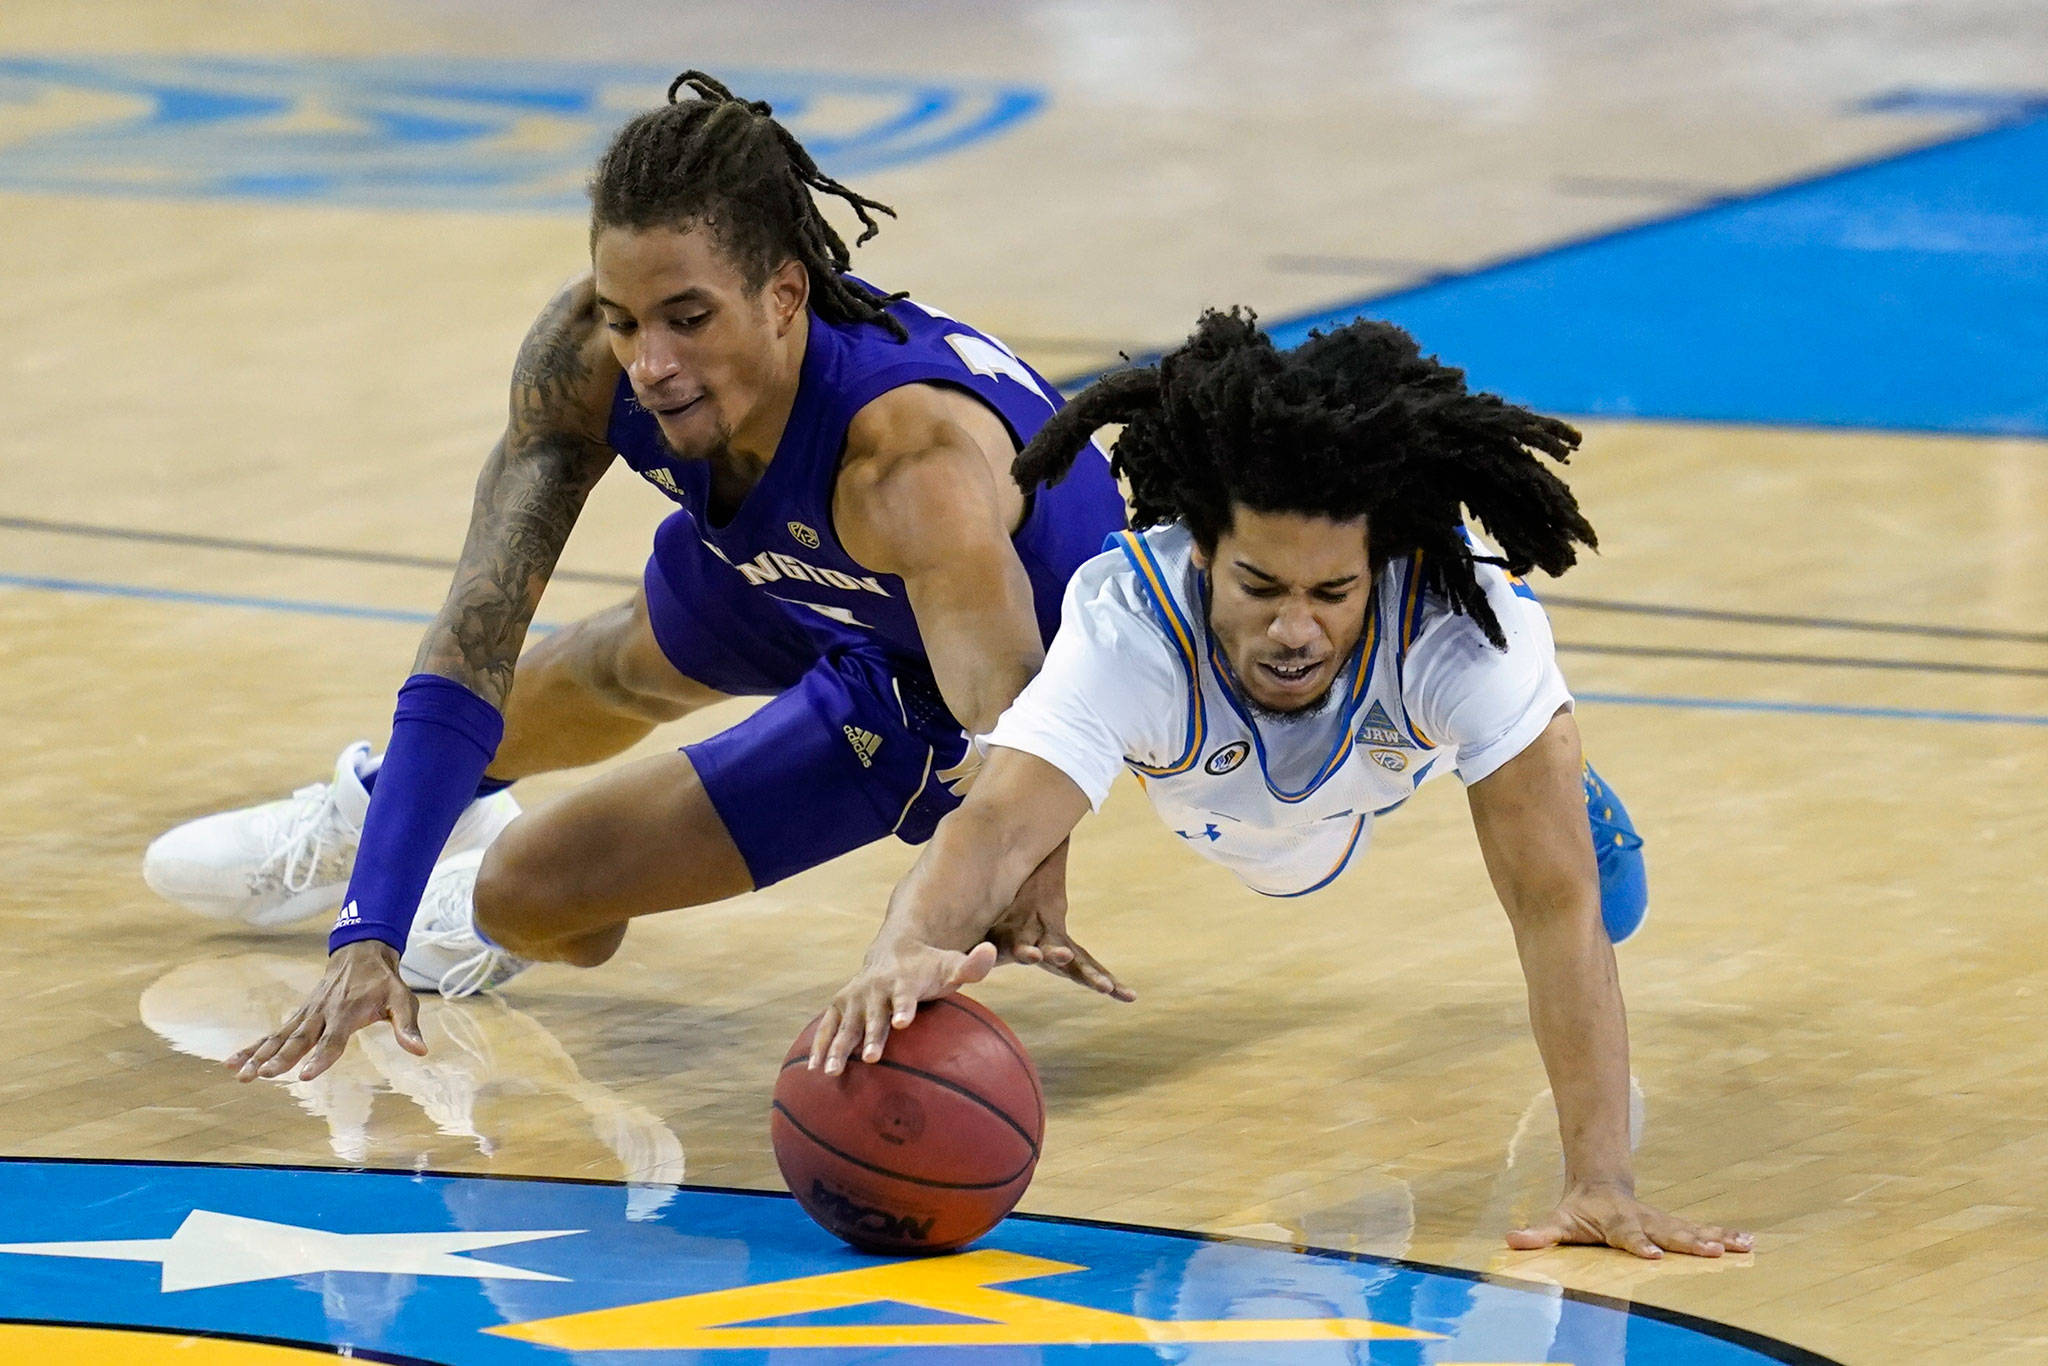 Washington forward Hameir Wright (left) and UCLA guard Tyger Campbell dive for a loose ball during the second half of a game Jan. 16, 2021, in Los Angeles. (AP Photo/Ashley Landis)